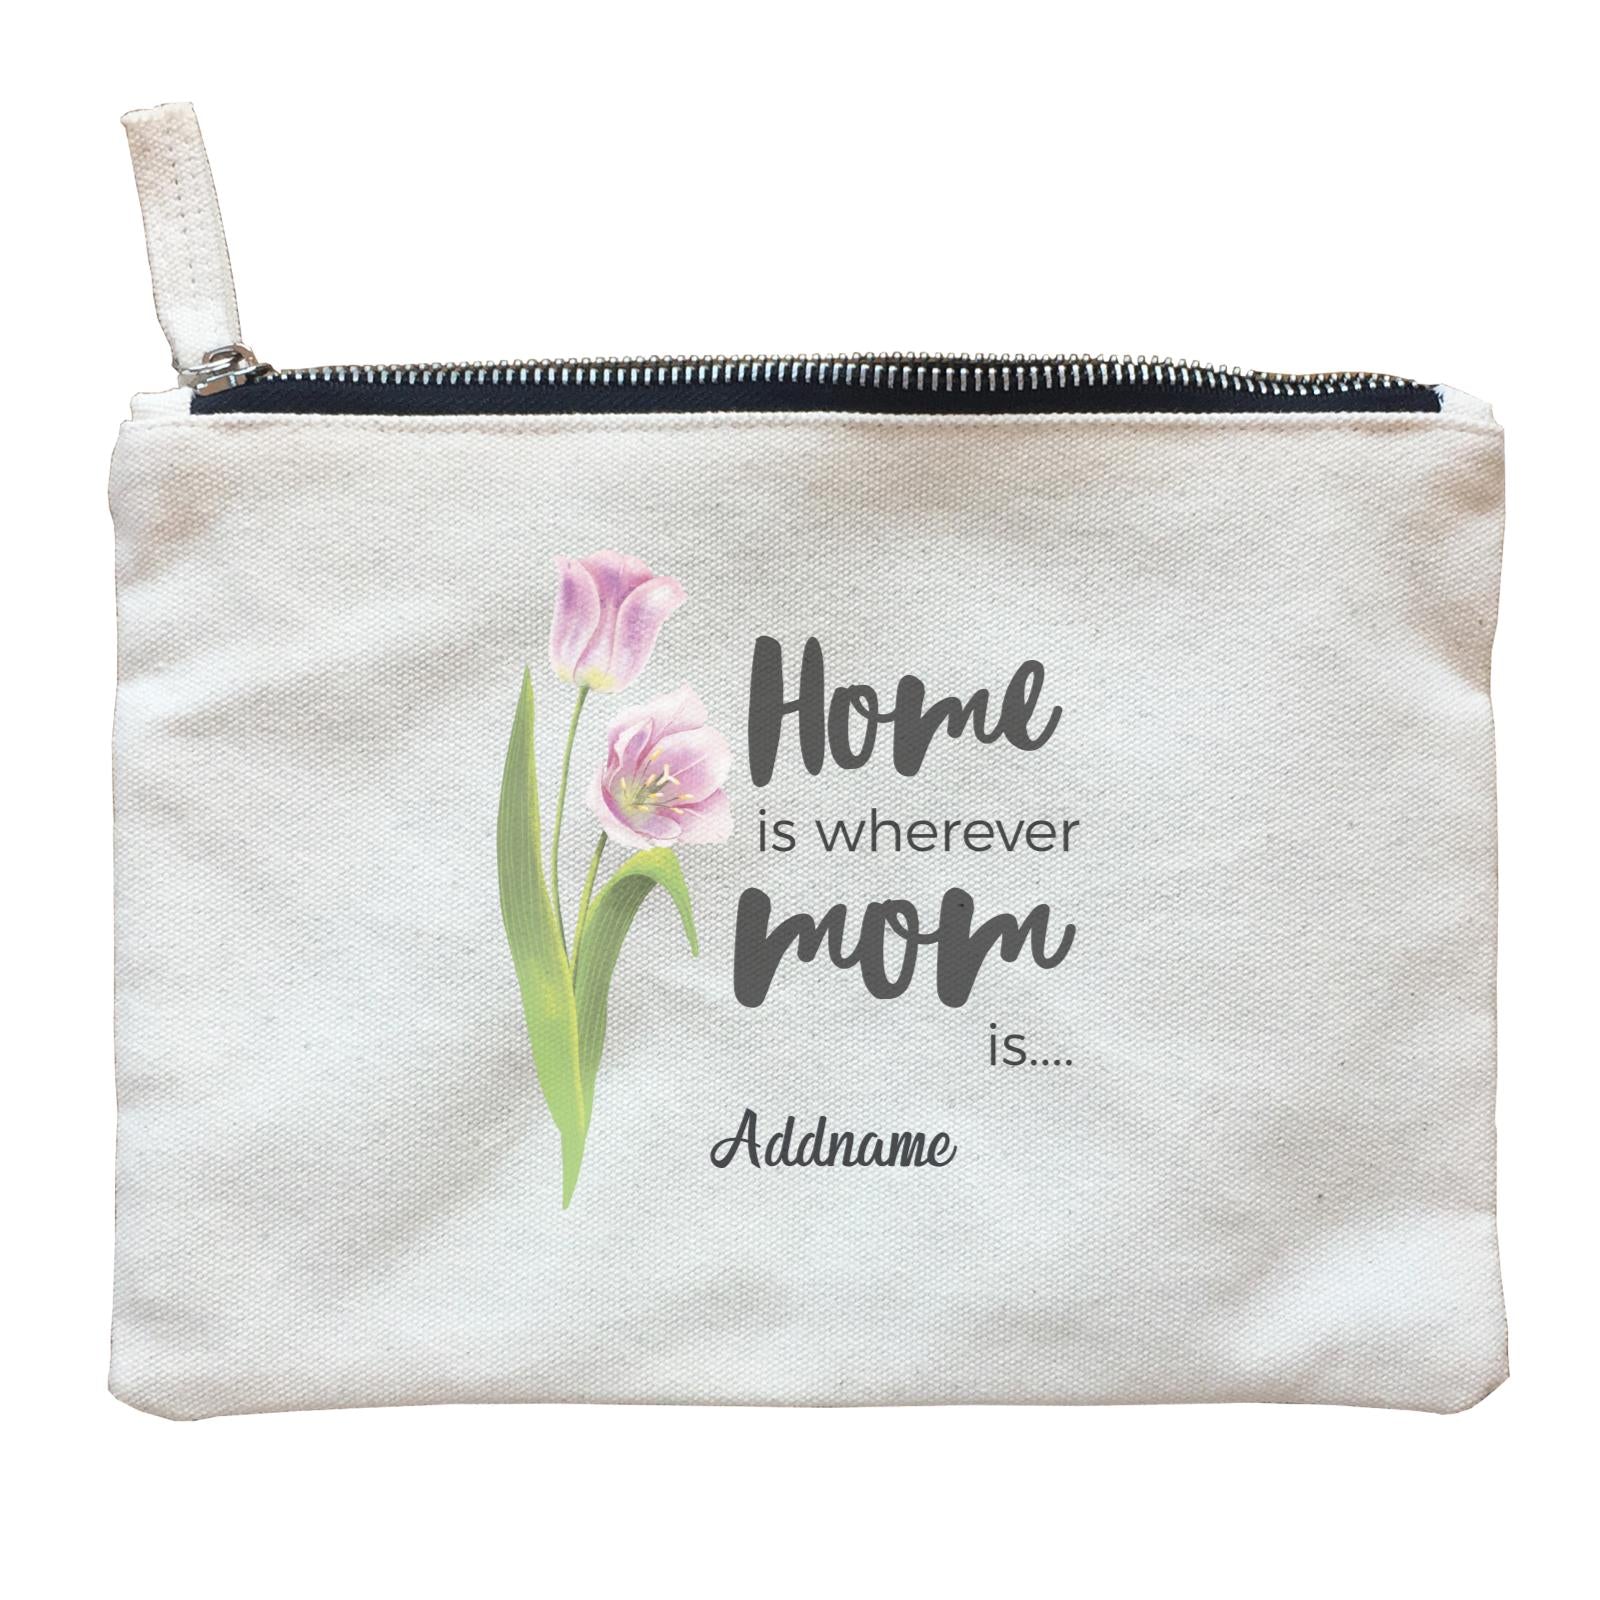 Sweet Mom Quotes 1 Tulip Home Is Wherever Mom Is Addname Zipper Pouch